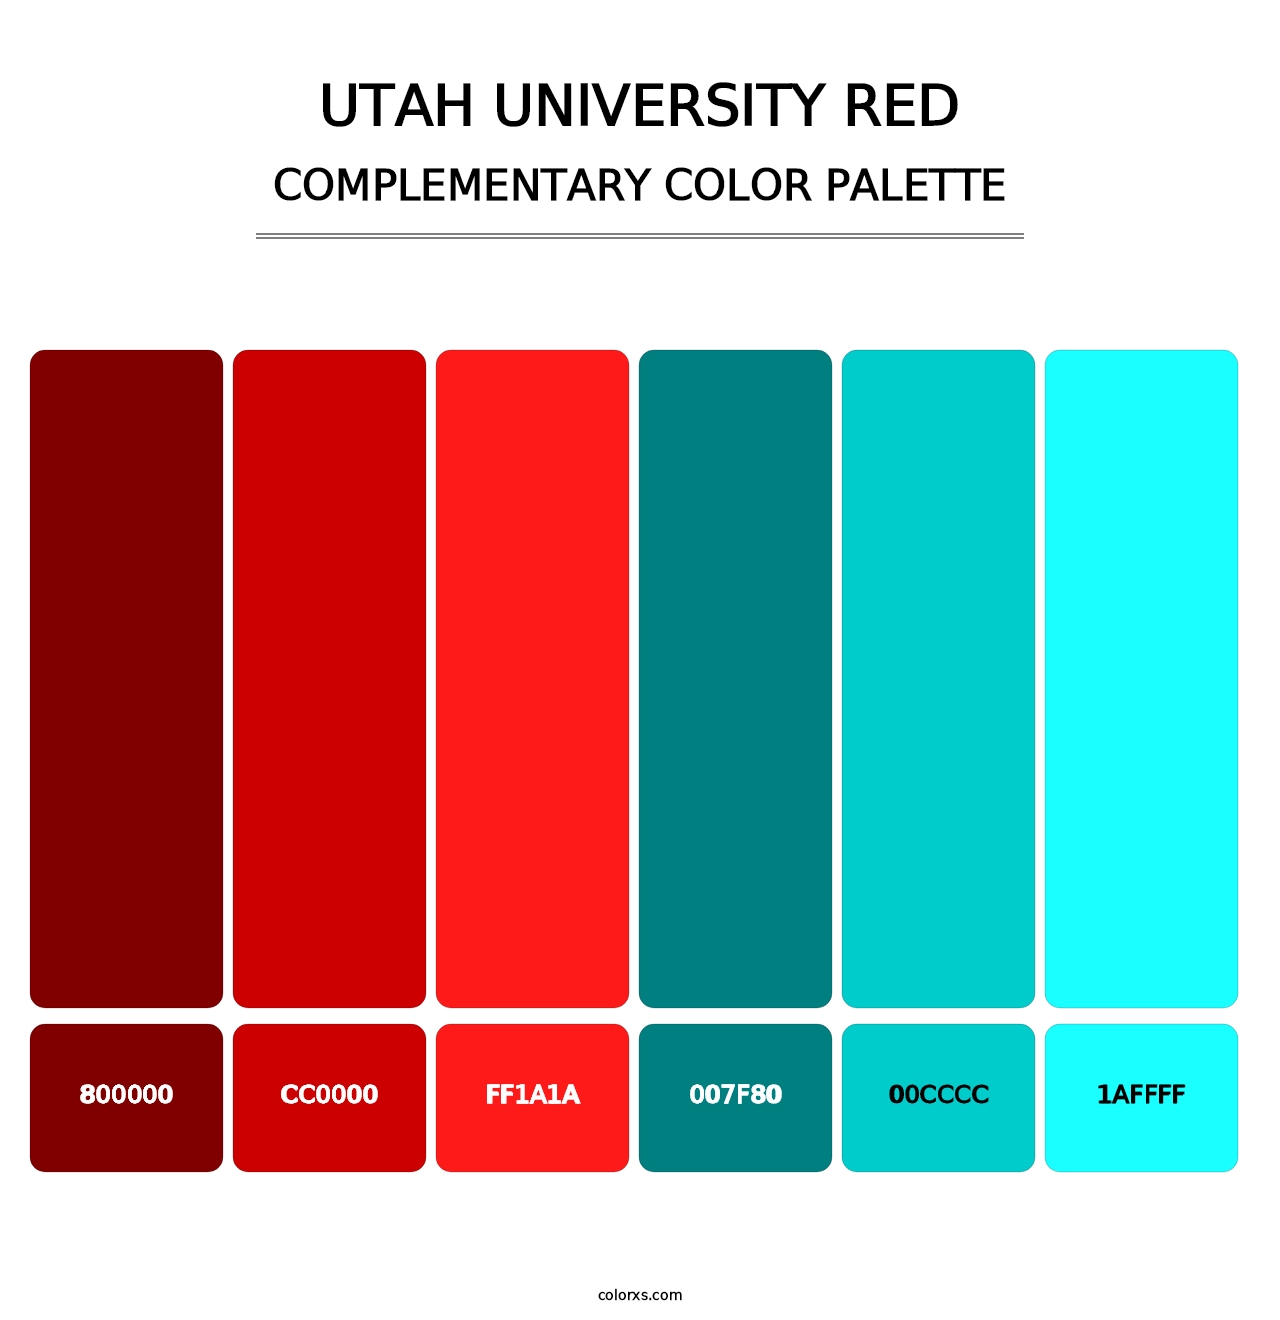 Utah University Red - Complementary Color Palette